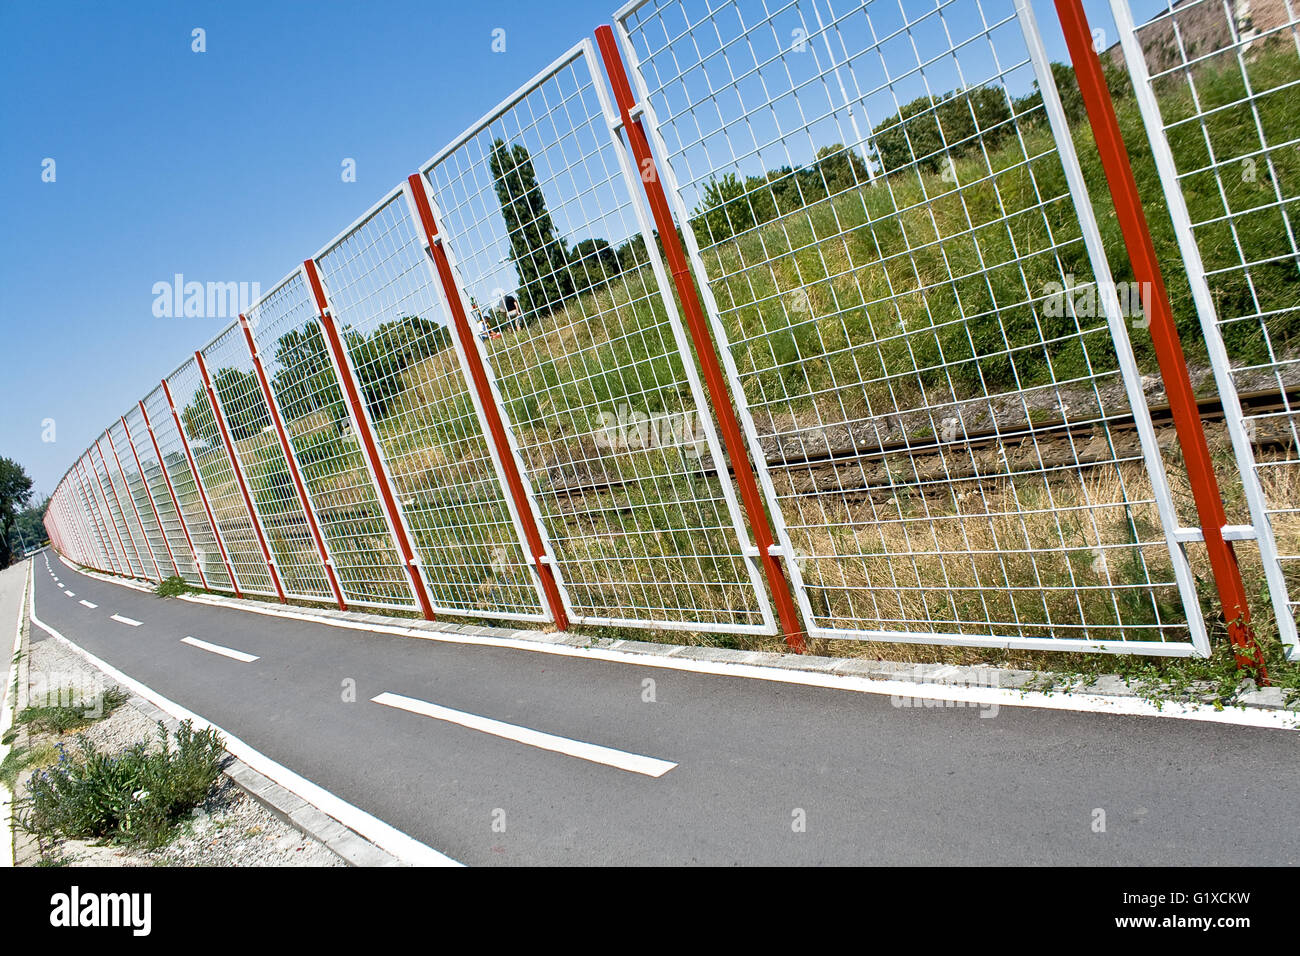 Bicycle path and fence Stock Photo